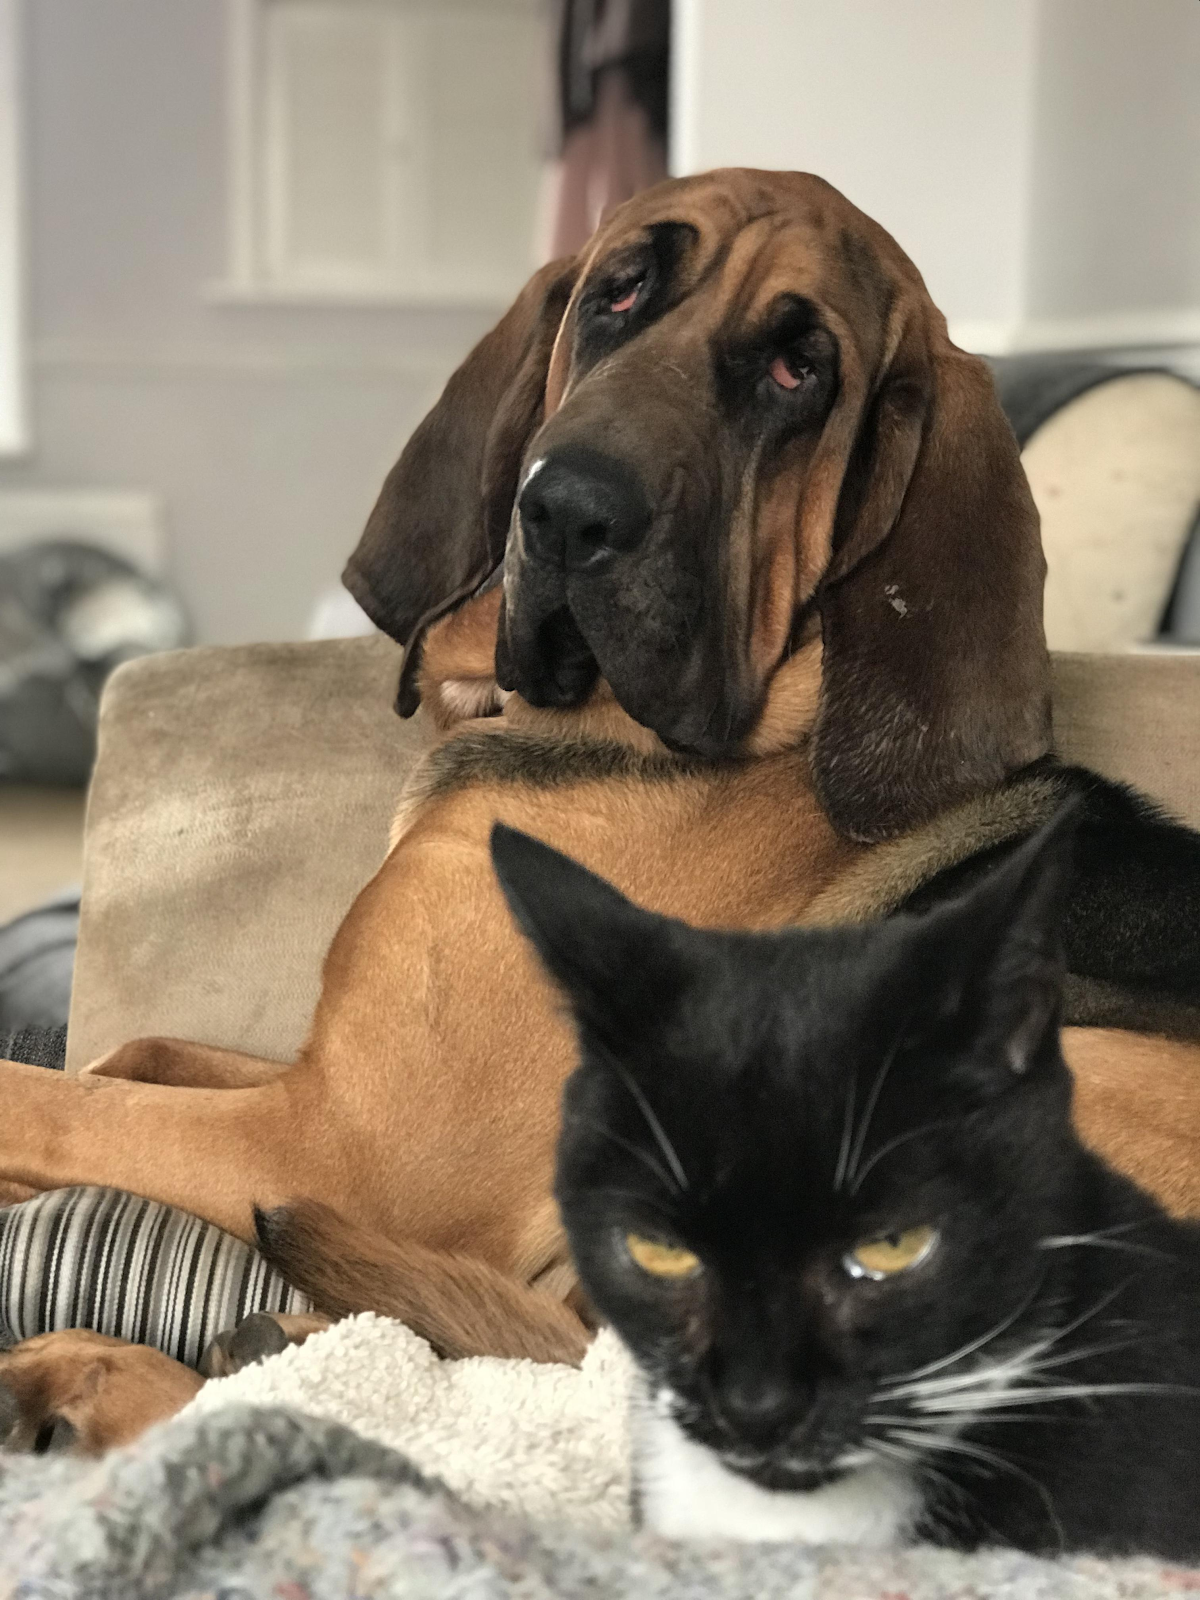 A tan and black dog with drooping jowls and long, floppy ears is relaxing on a sofa with a black and white cat